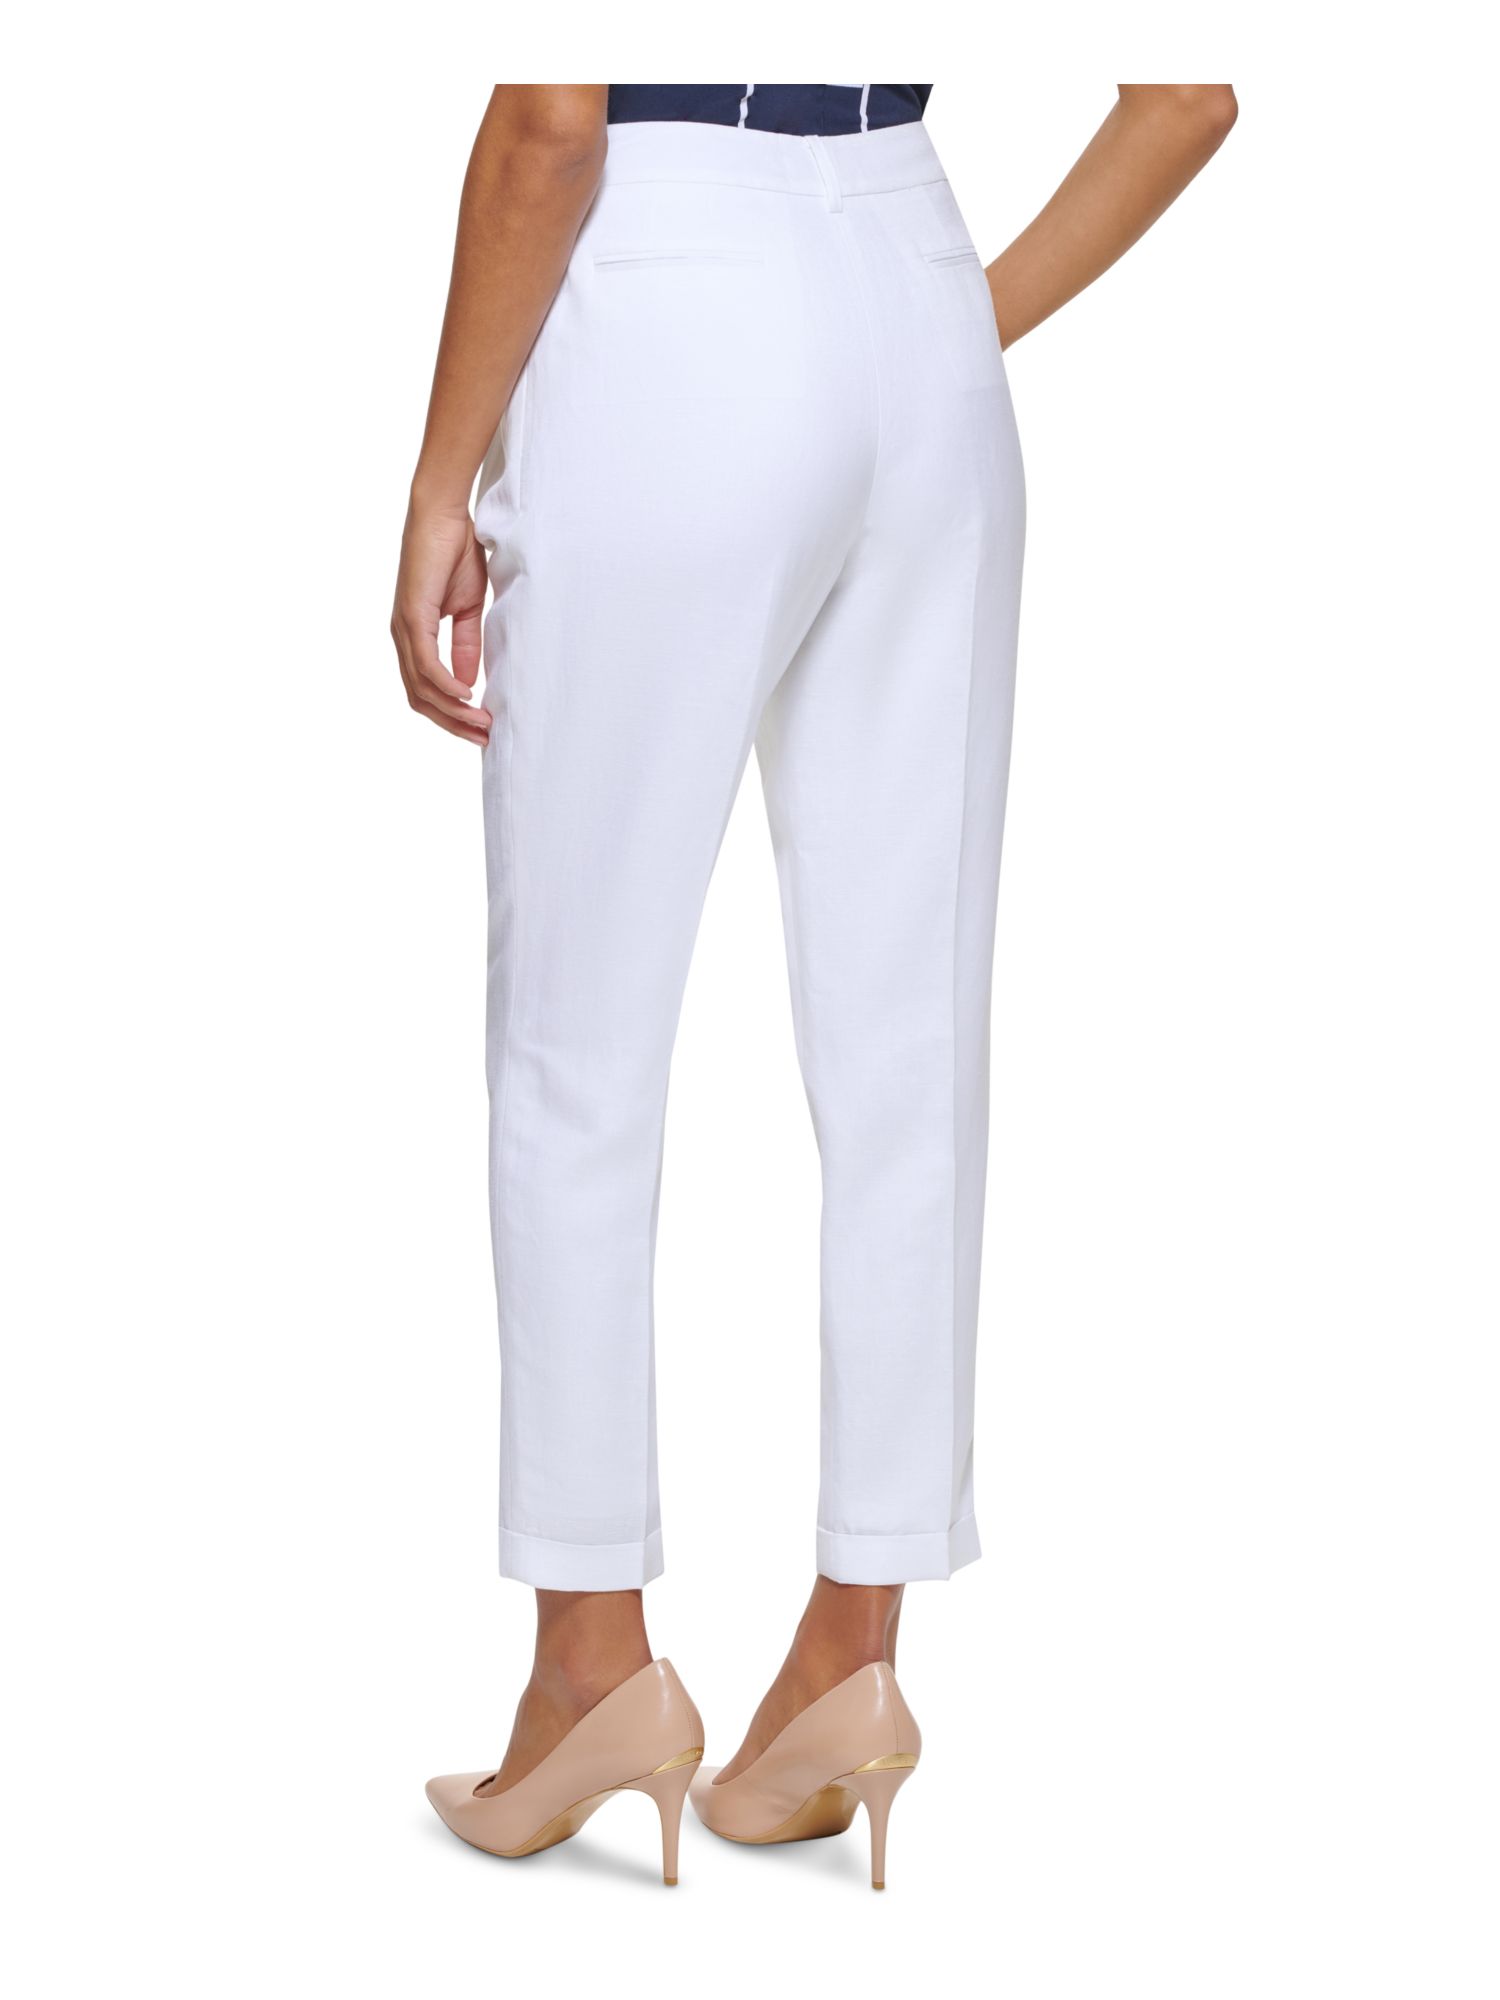 CALVIN KLEIN Womens Ivory Zippered Pocketed Hook And Bar Closure Pleated Wear To Work Cropped Pants Petites 8P